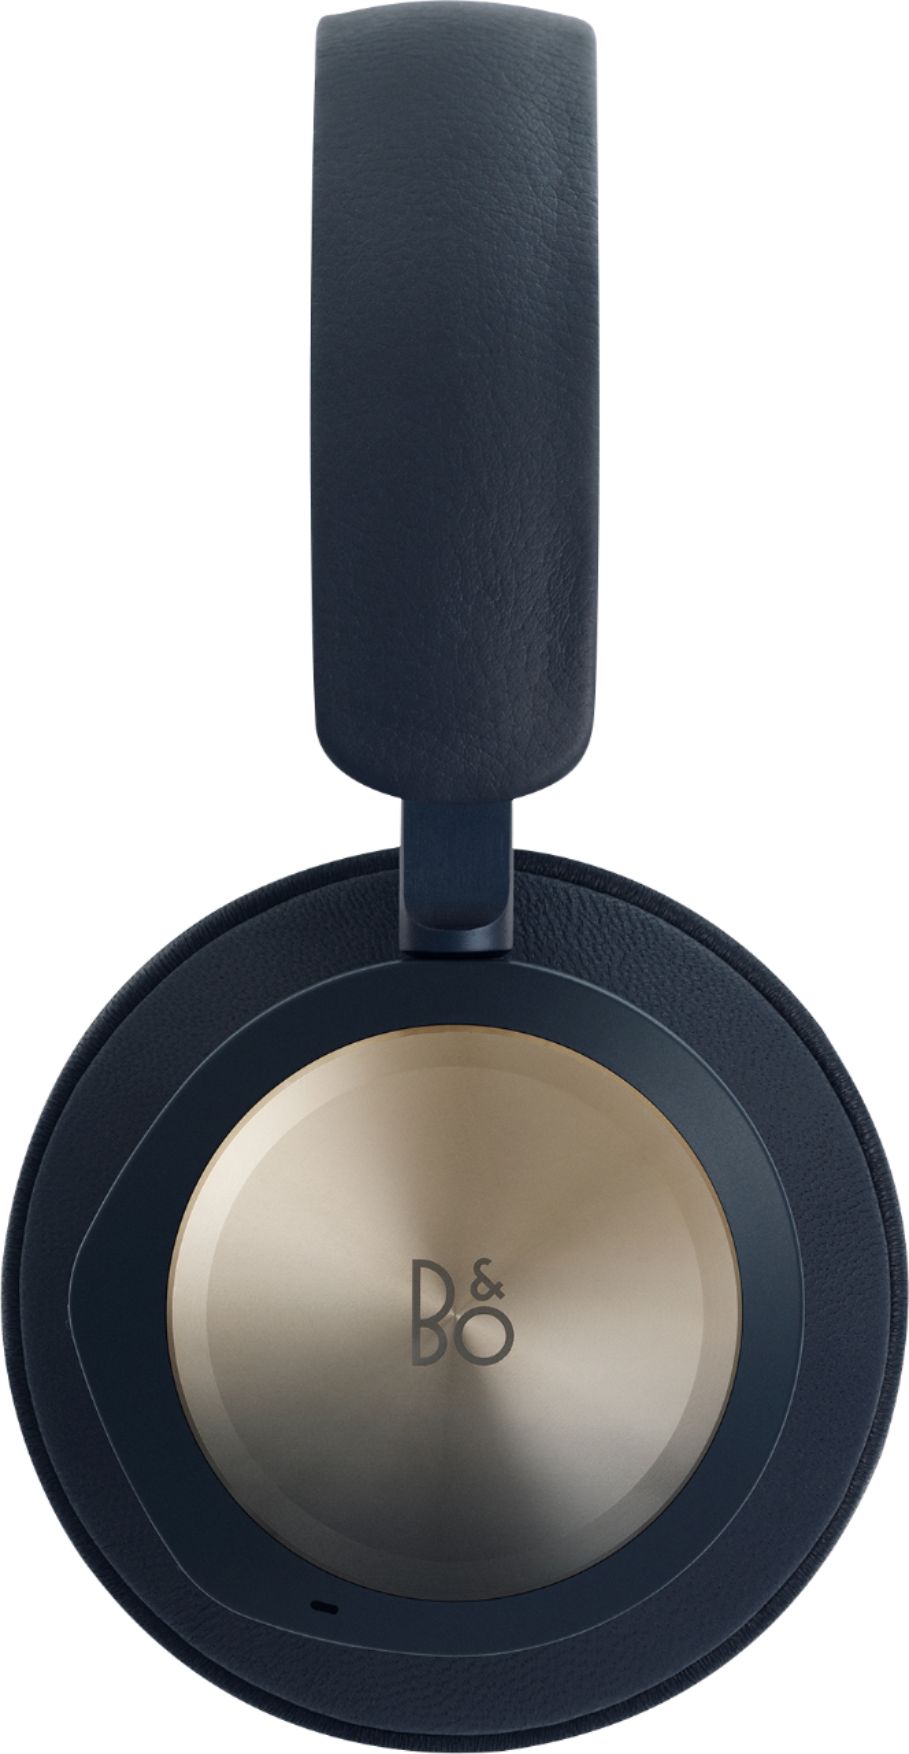 Bang & Olufsen - Beoplay Portal Xbox Wireless Noise Cancelling Over-the-Ear Headphones - Navy